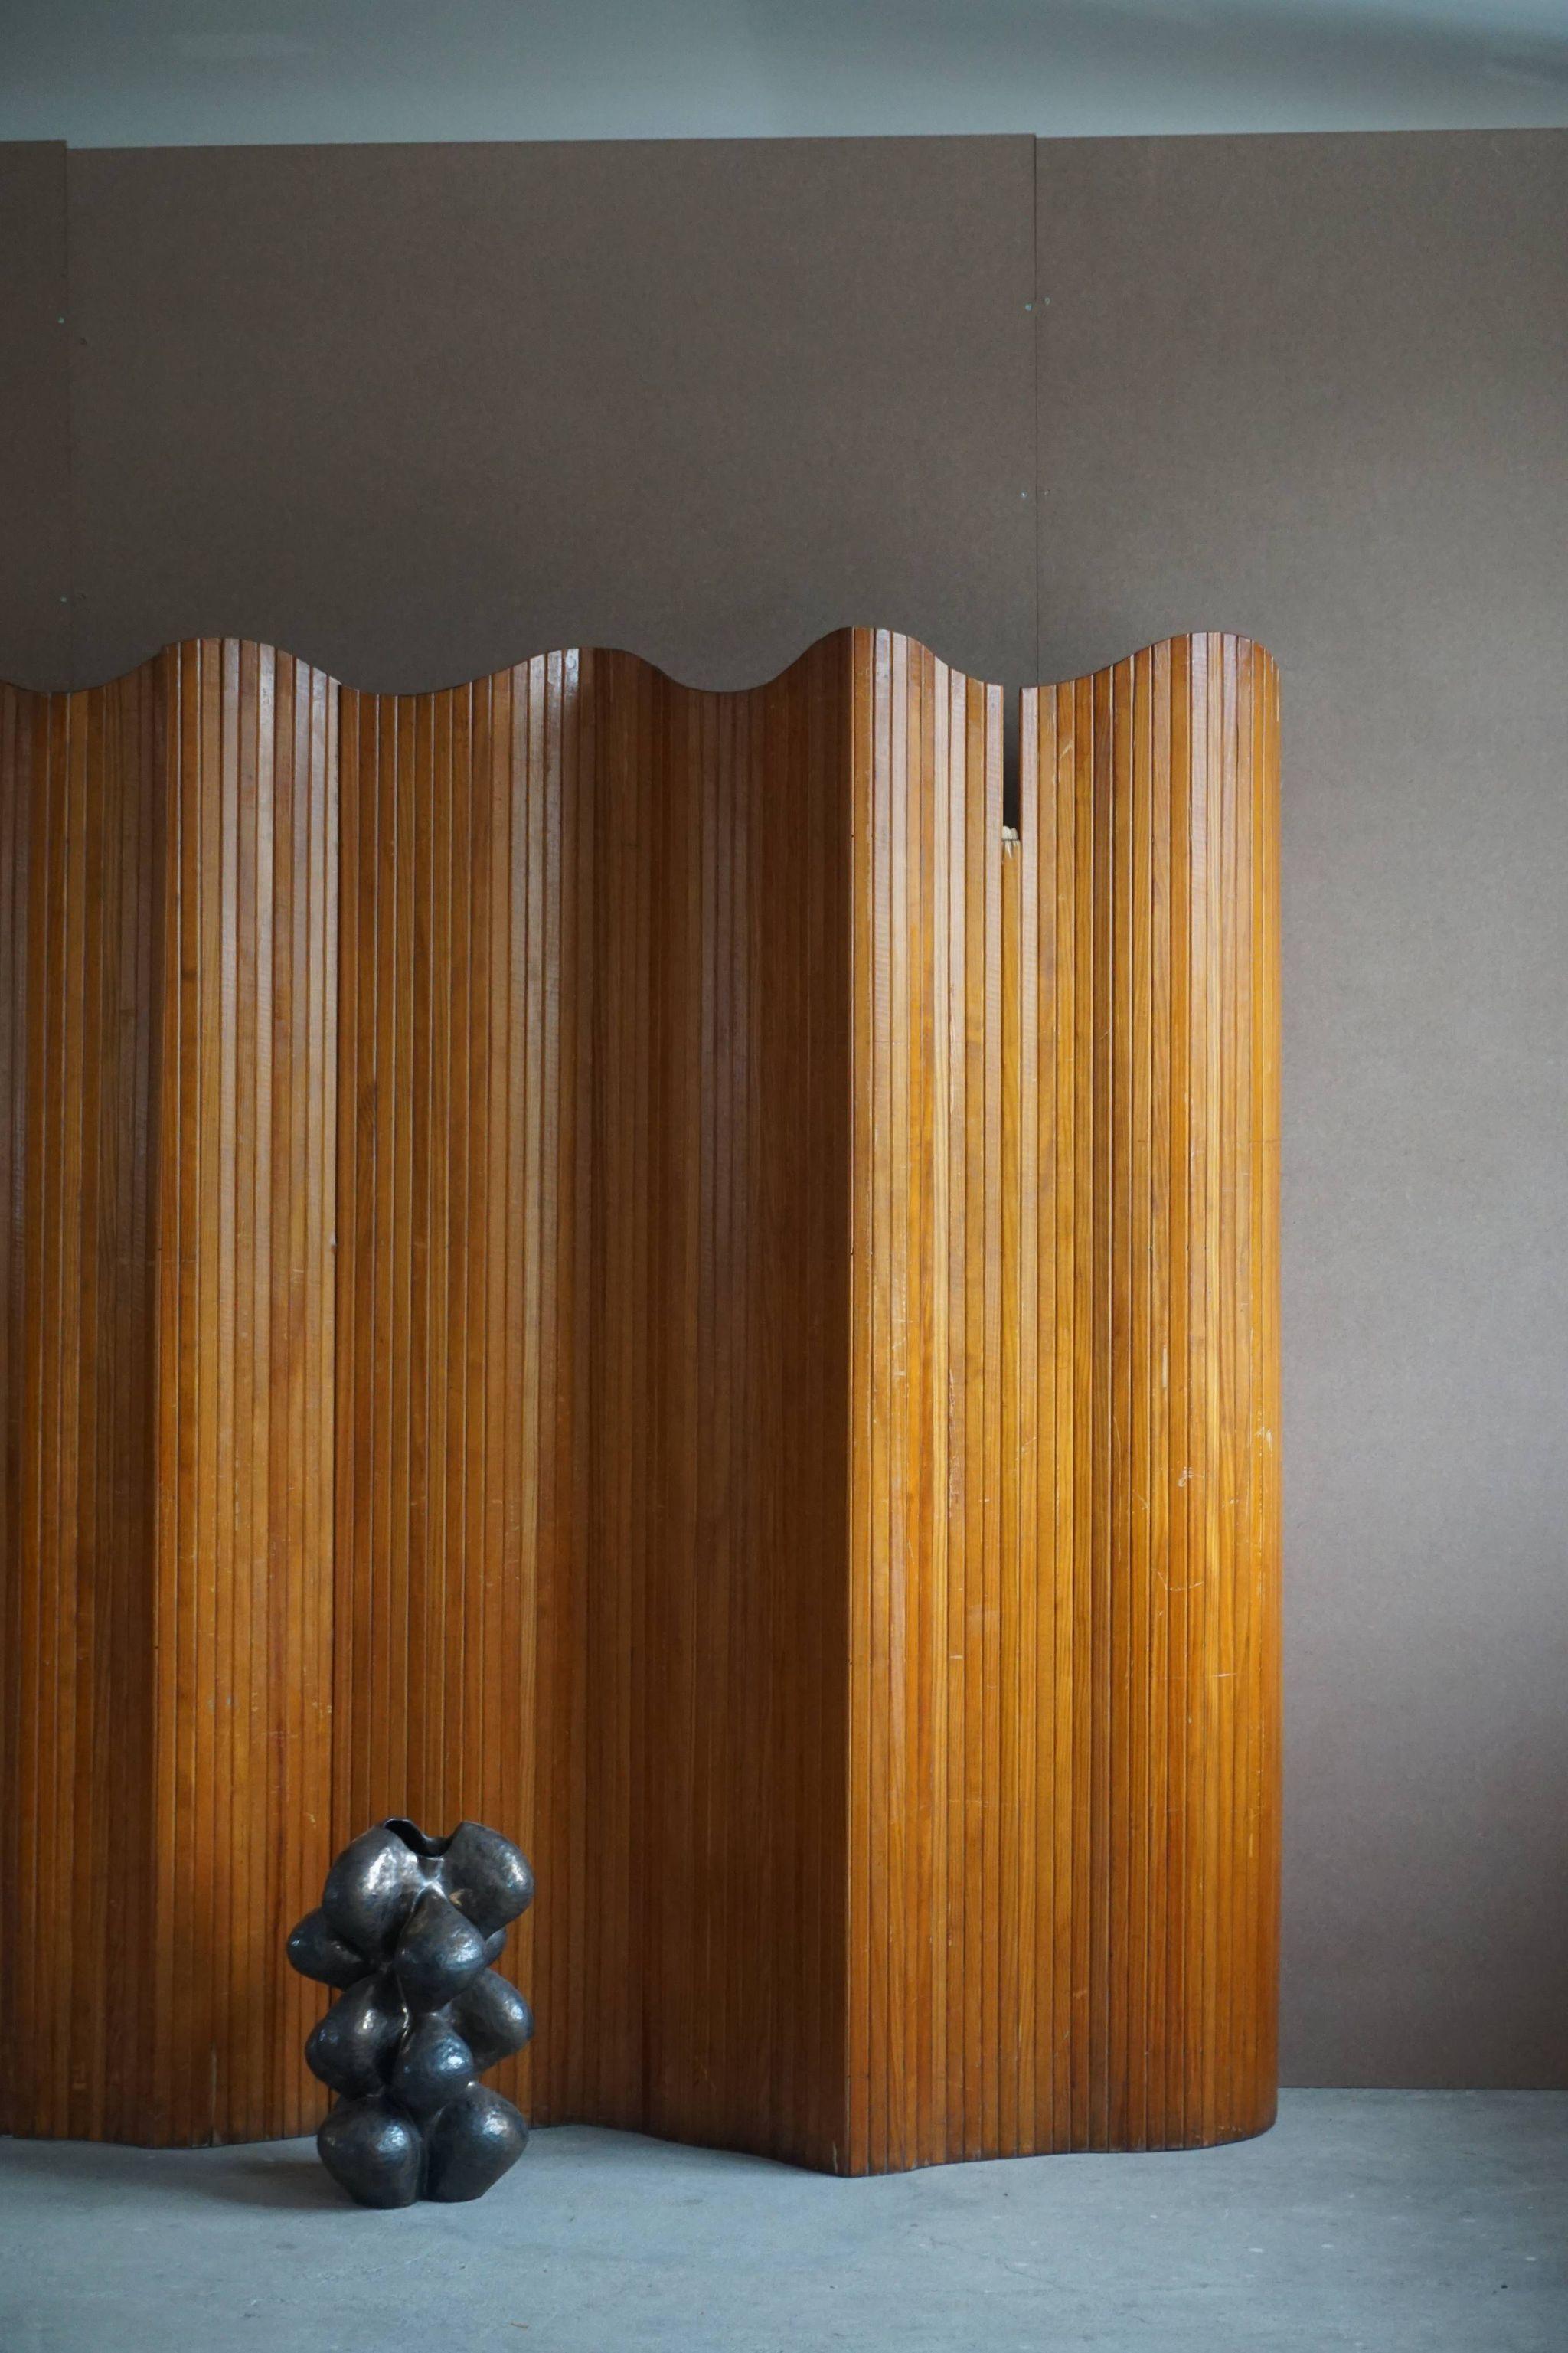 French Art Deco freestanding room divider / folding screen in patinated pine by Firm Baumann, Paris, 1940s.

Signed with applied brass manufacturer´s label.
Provience: (Paris, 8 Rue, Abel).

The screen can be folded, coiled or extended into any